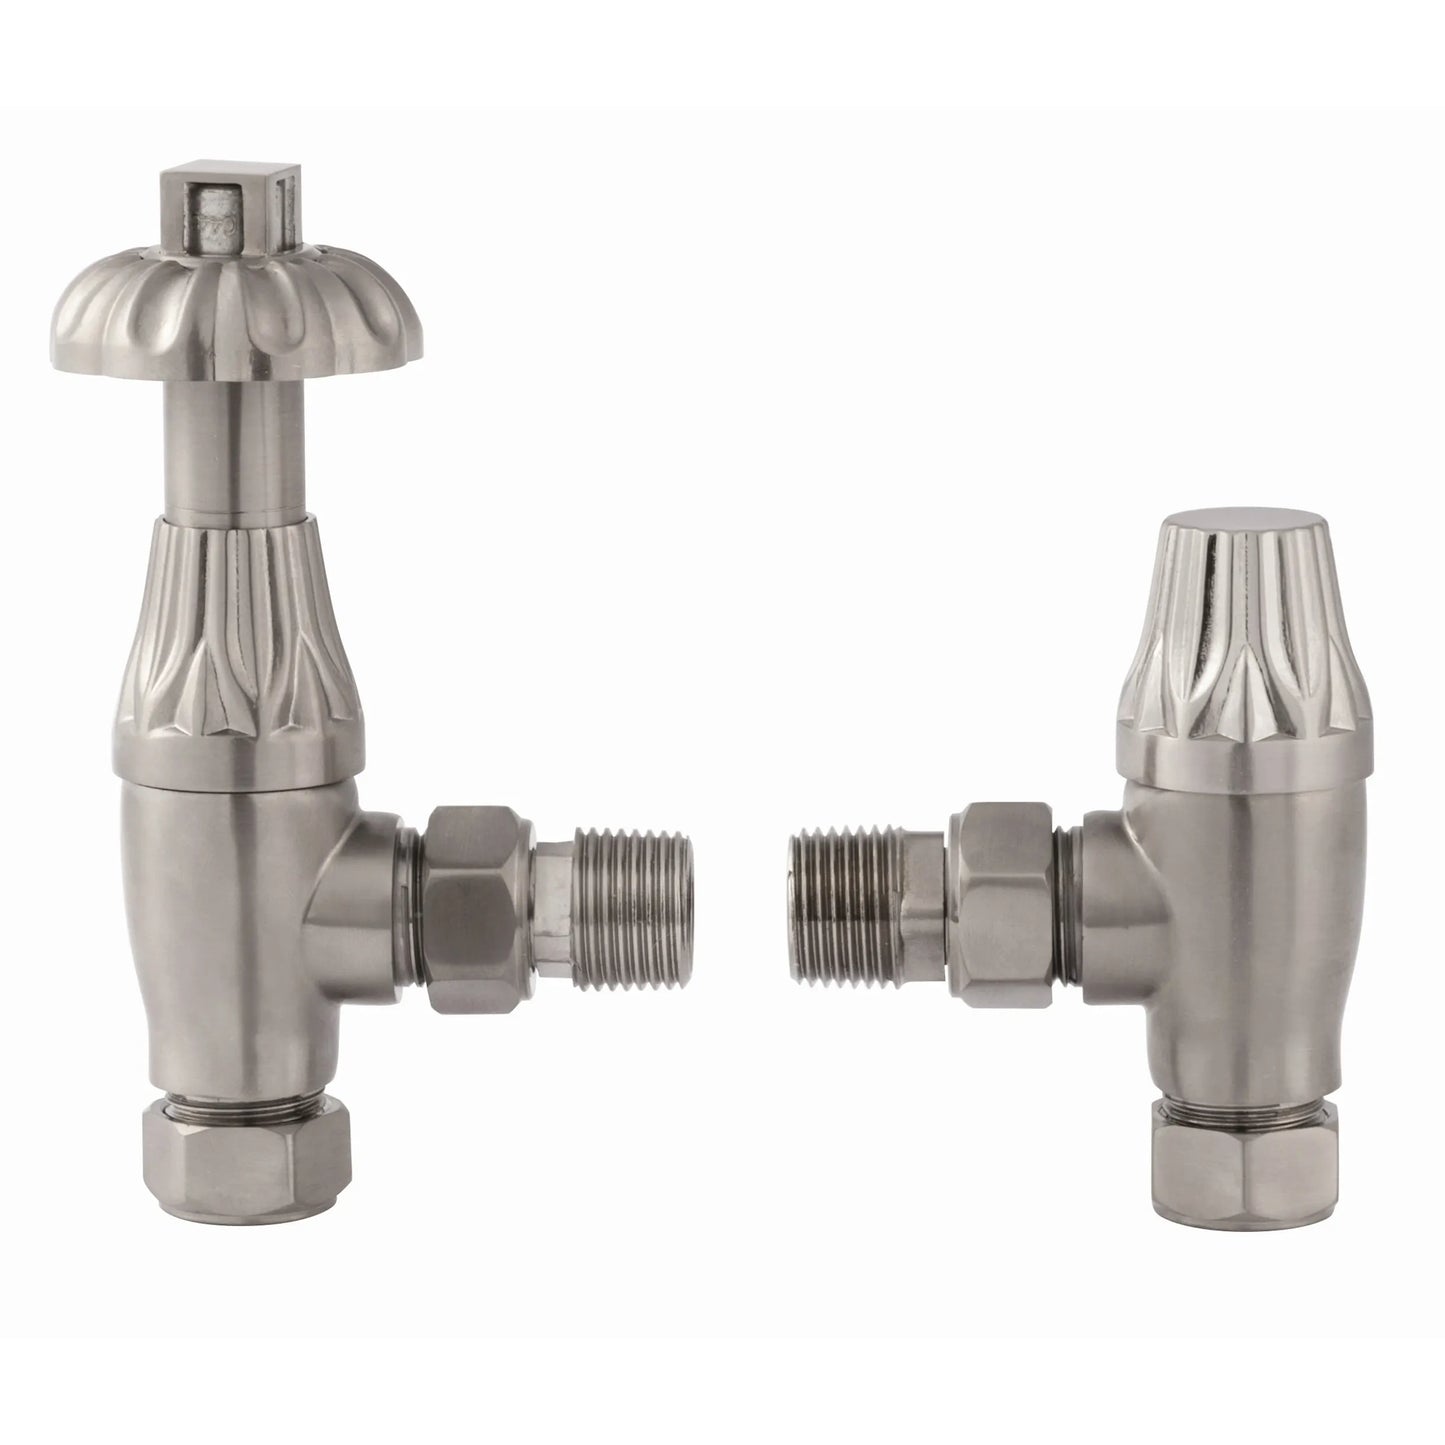 Westminster Traditional Thermostatic Angled Radiator Valves 15mm